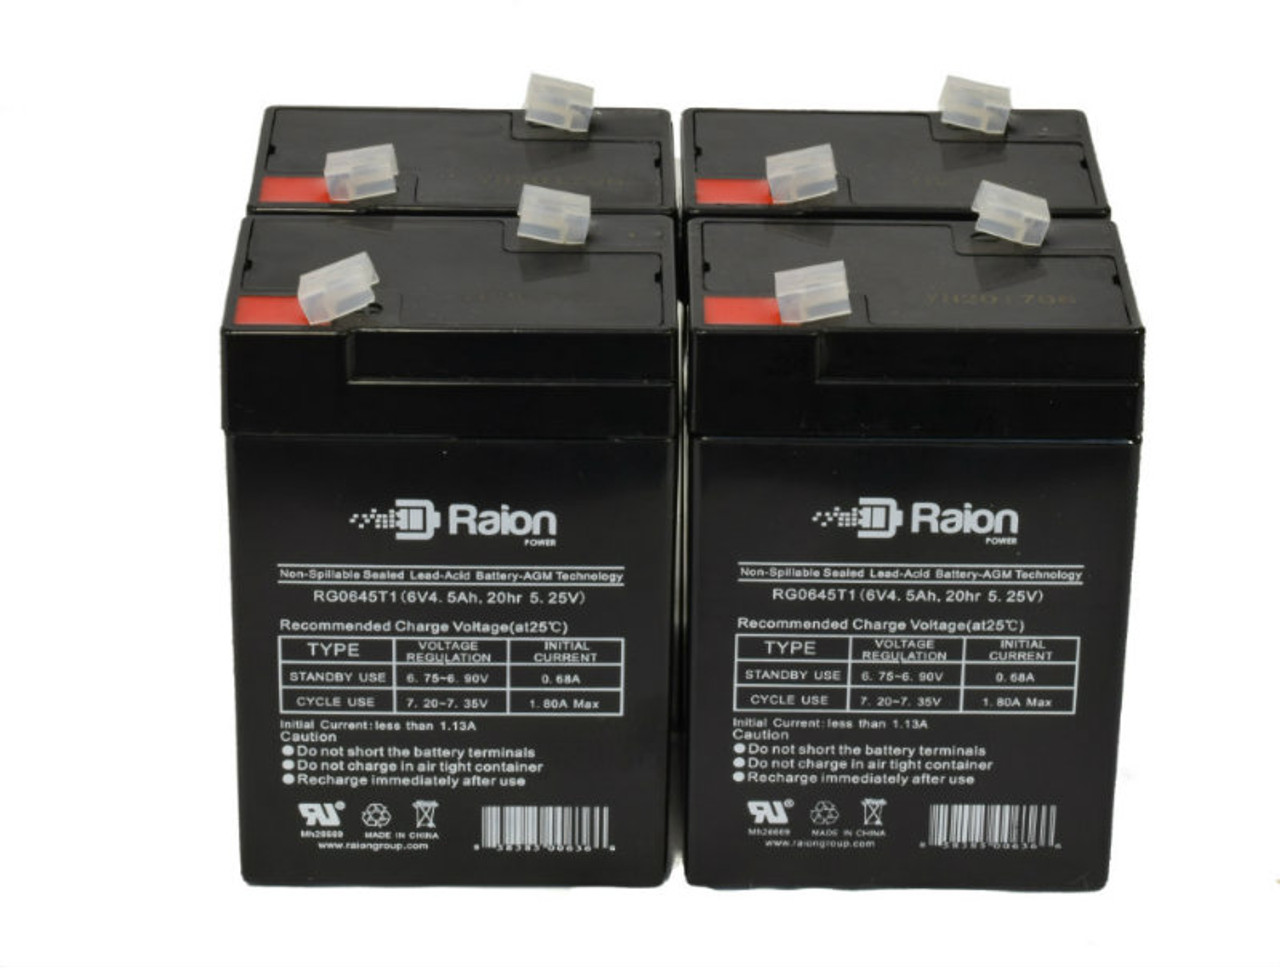 Raion Power 6V 4.5Ah Replacement Emergency Light Battery for Dual-Lite 12-295 / 12295 / 0120295 - 4 Pack